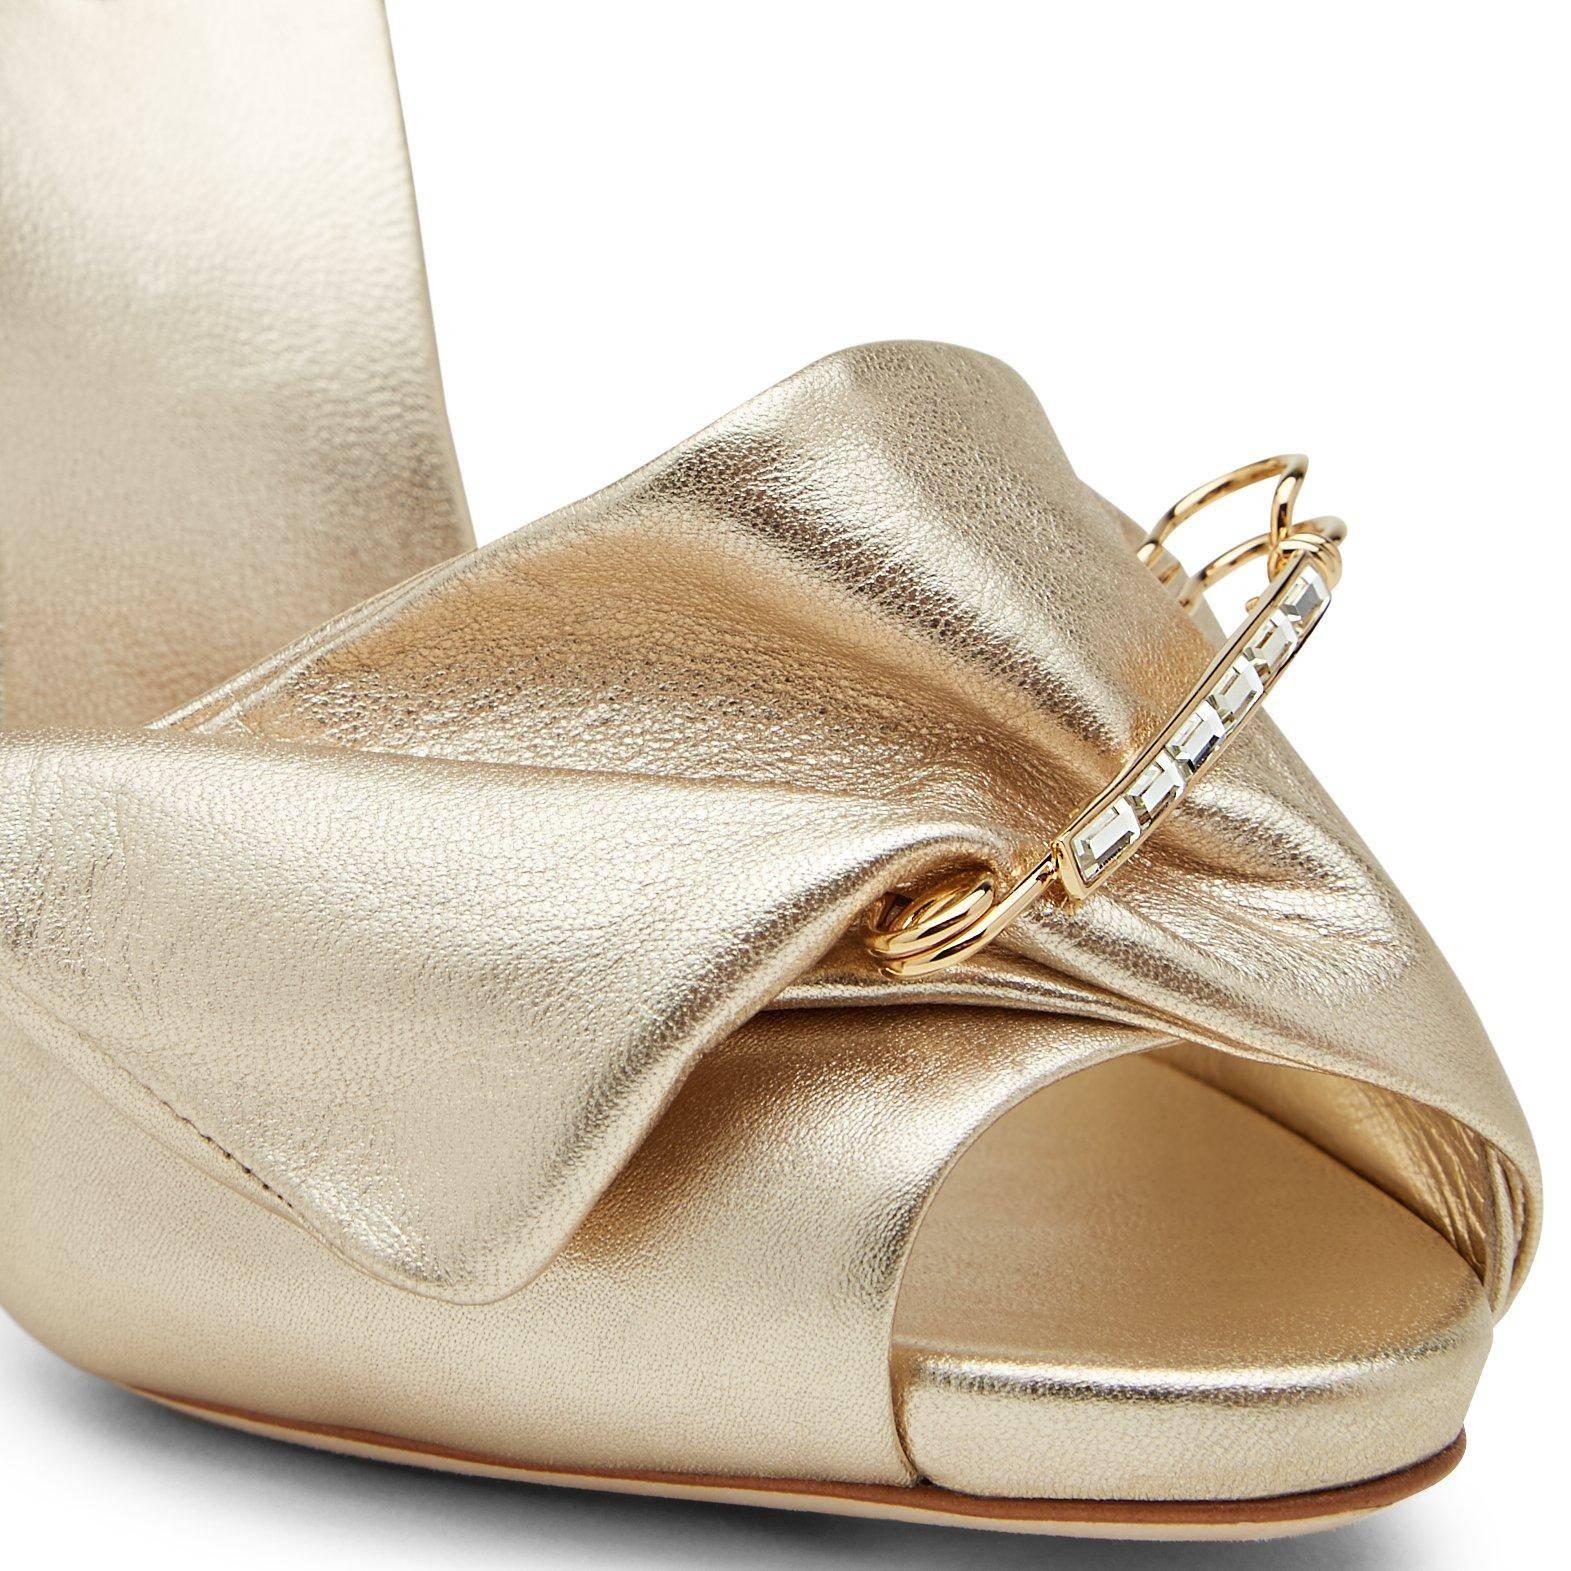 Giuseppe Zanotti New Gold Leather Bow Crystal Brooch Evening Sandals Heels Box

Size IT 40
Leather
Crystal
Gold metal hardware
Made in Italy
Heel height 4.75